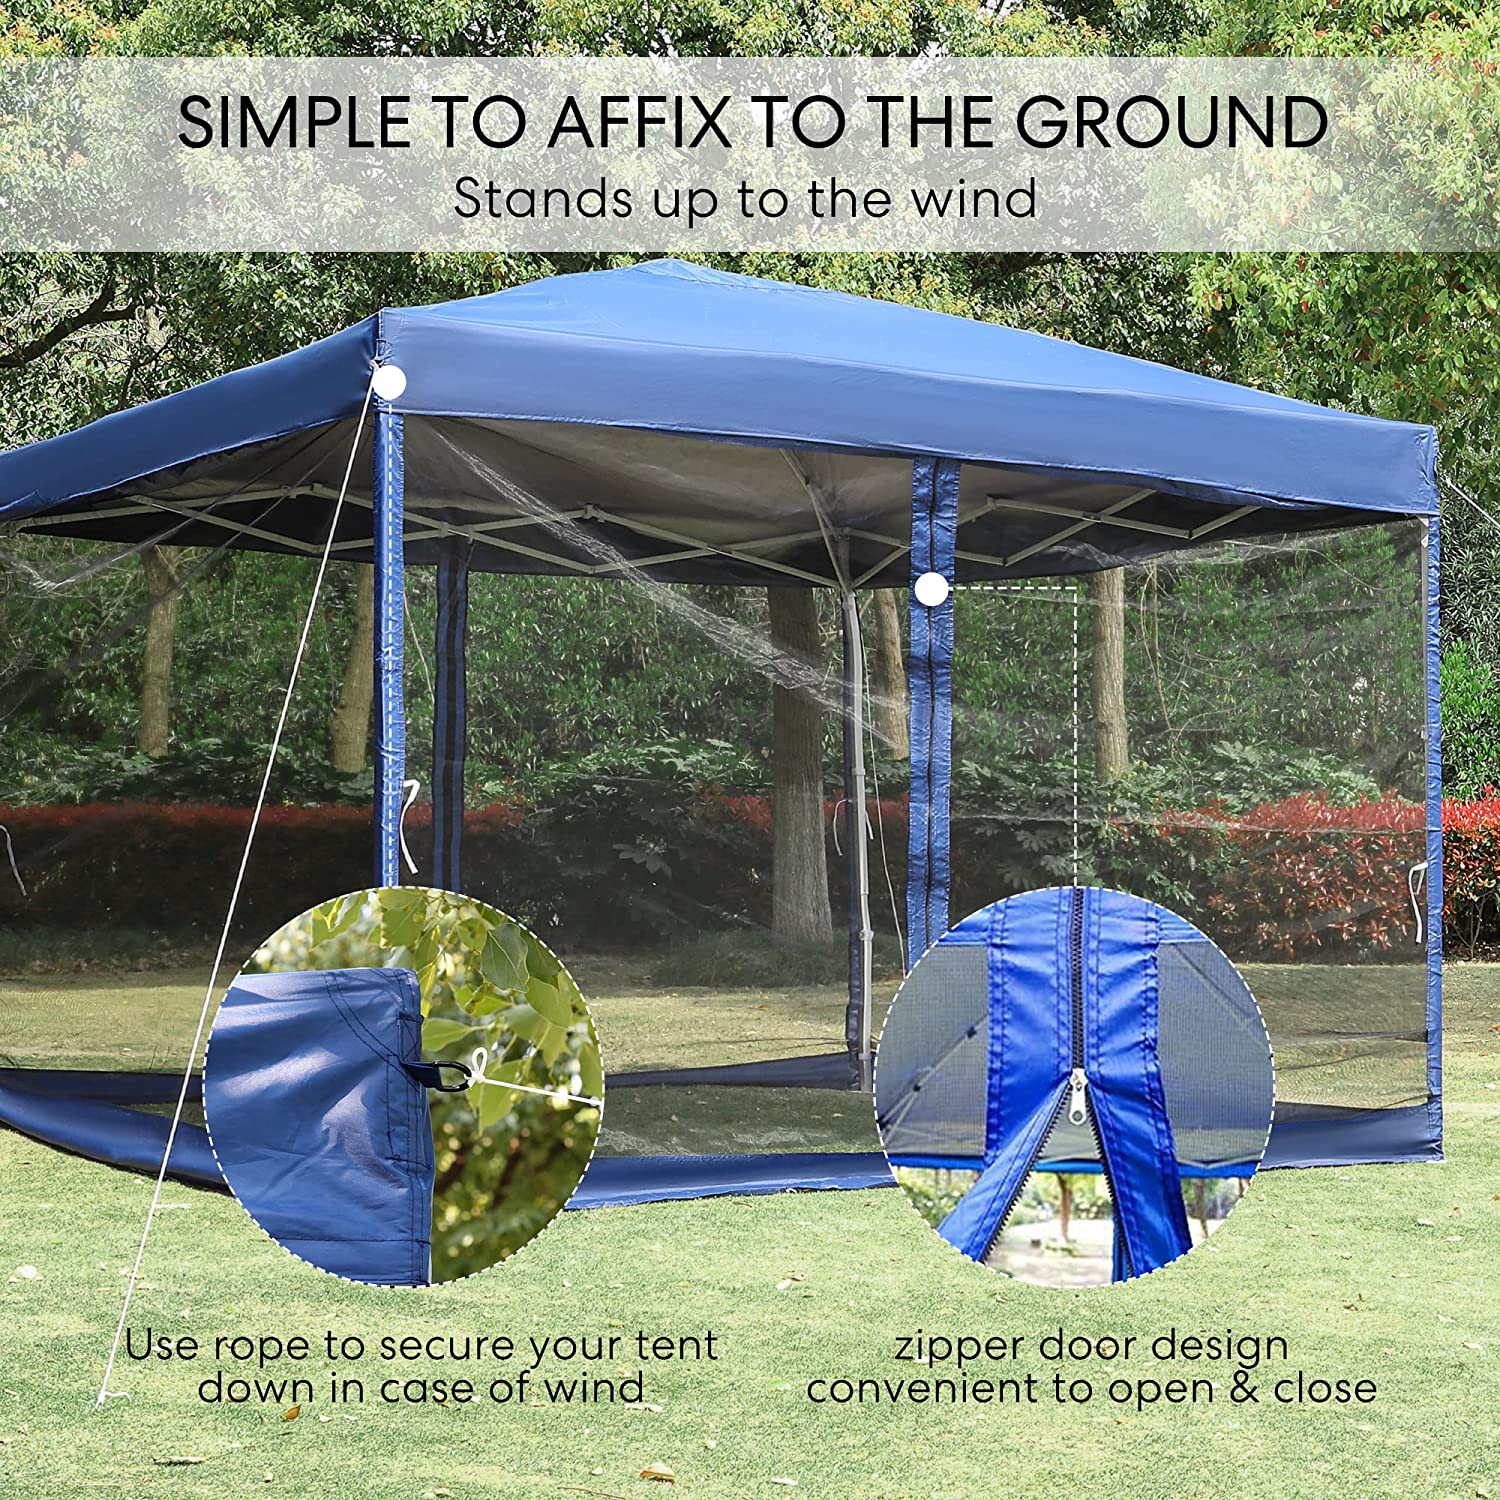 VIVOHOME 210D Oxford Outdoor Easy Pop Up Canopy Screen Party Tent with Mesh Side Walls (8 x 8 FT, Blue)